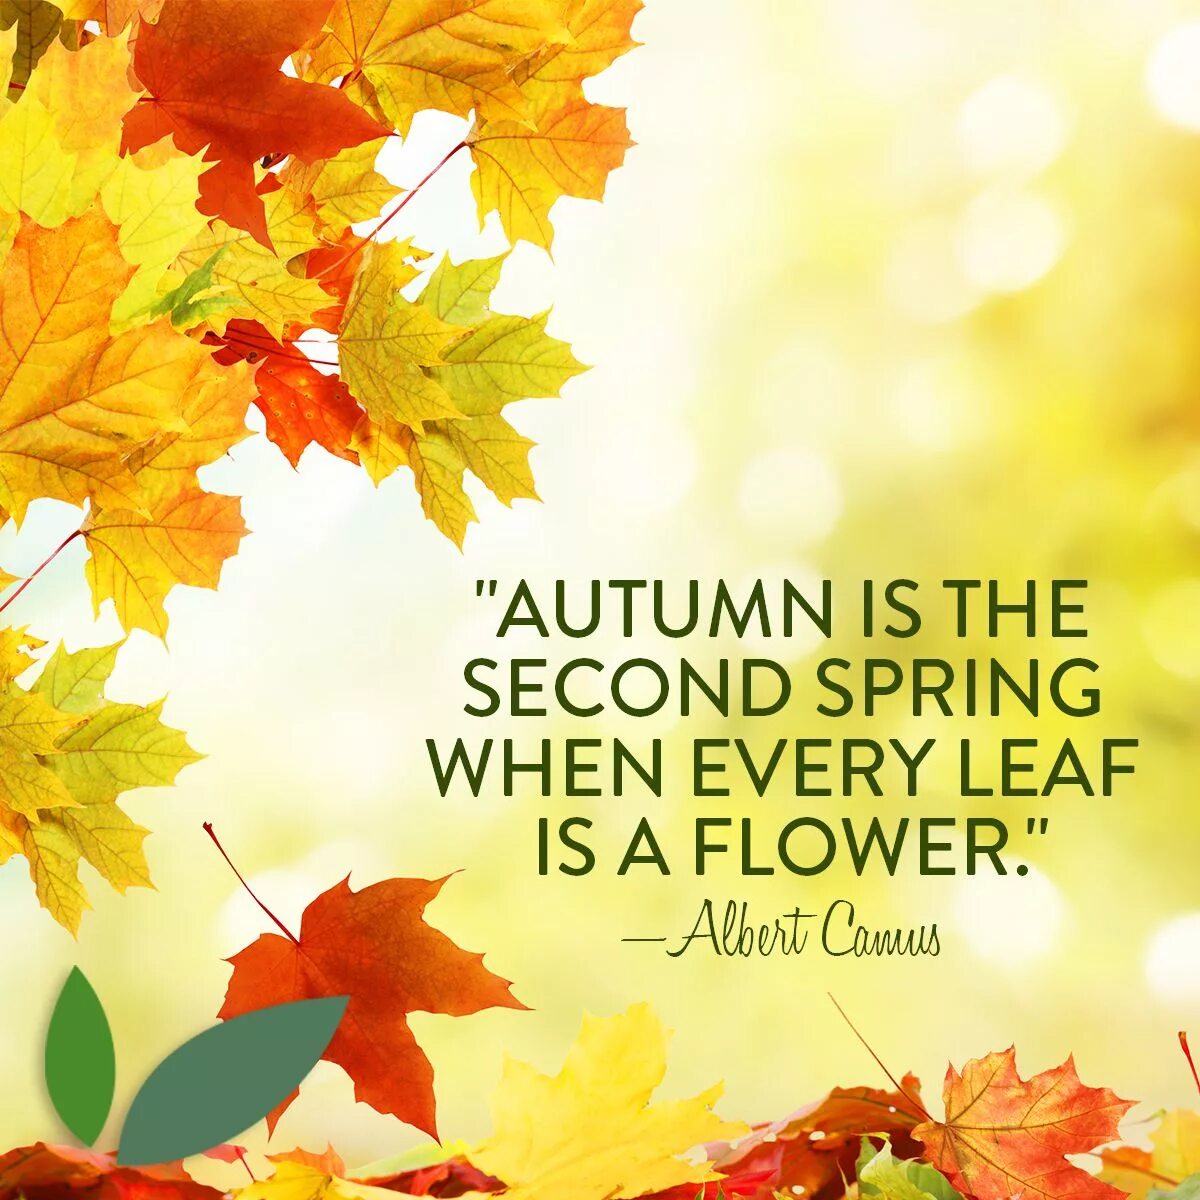 In autumn it is often. Autumn is a second Spring when every Leaf is a Flower. Happy autumn перевод. Leaves everywhere.